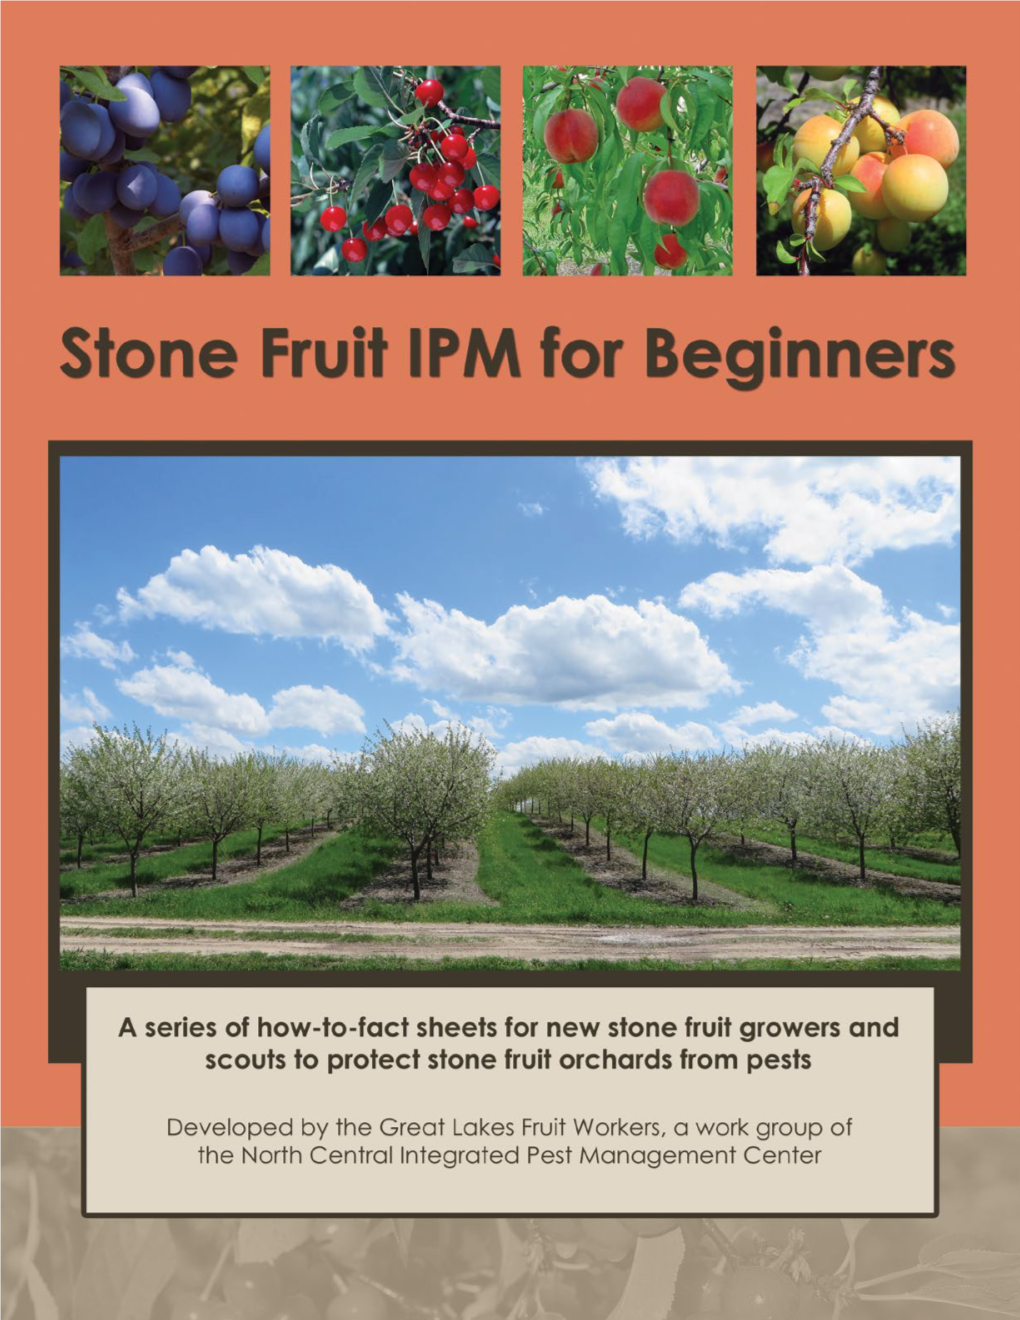 Stone Fruit IPM for Beginners